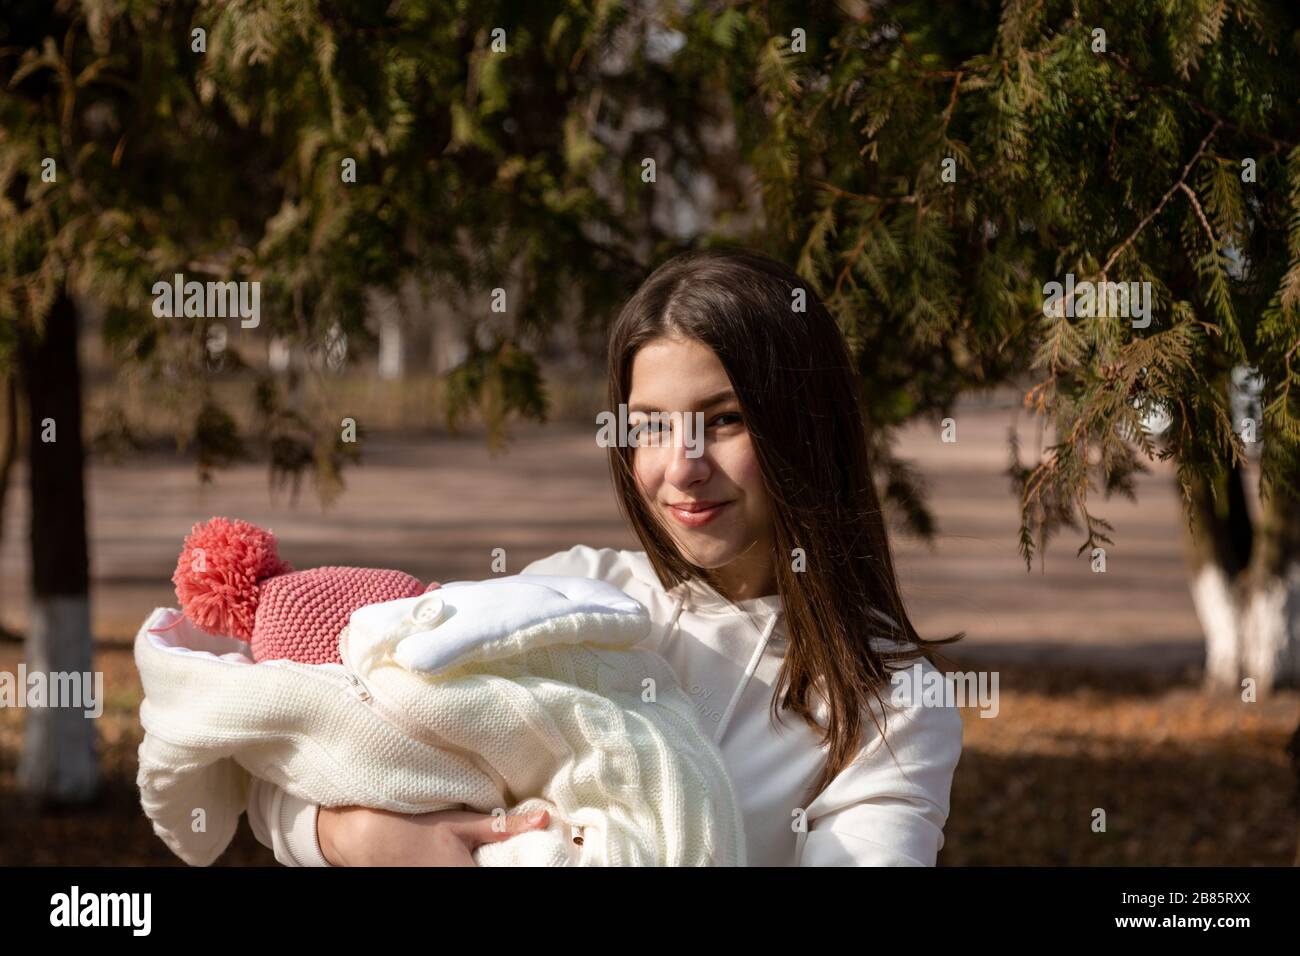 Pretty young woman holding a newborn baby in her arms. They are standing outside on a sunny day around the Christmas tree. Stock Photo